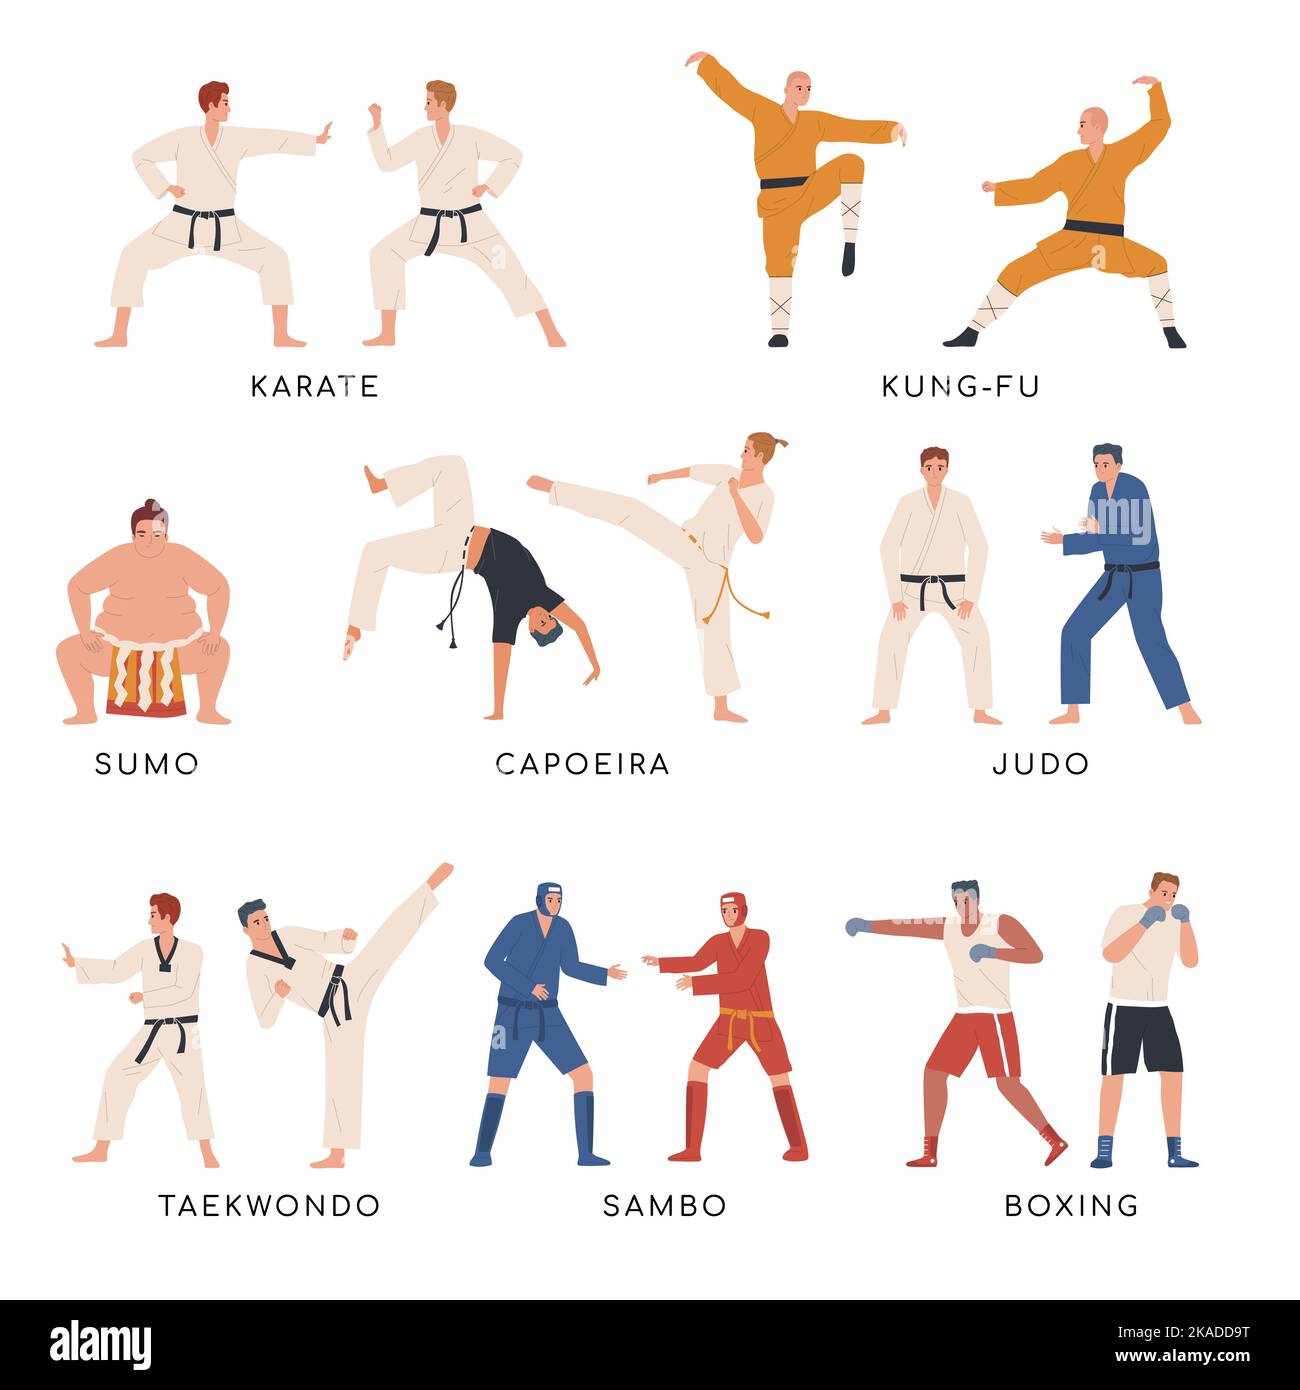 In martial arts movies, why do they pose with their fingers in various  configurations? - Quora